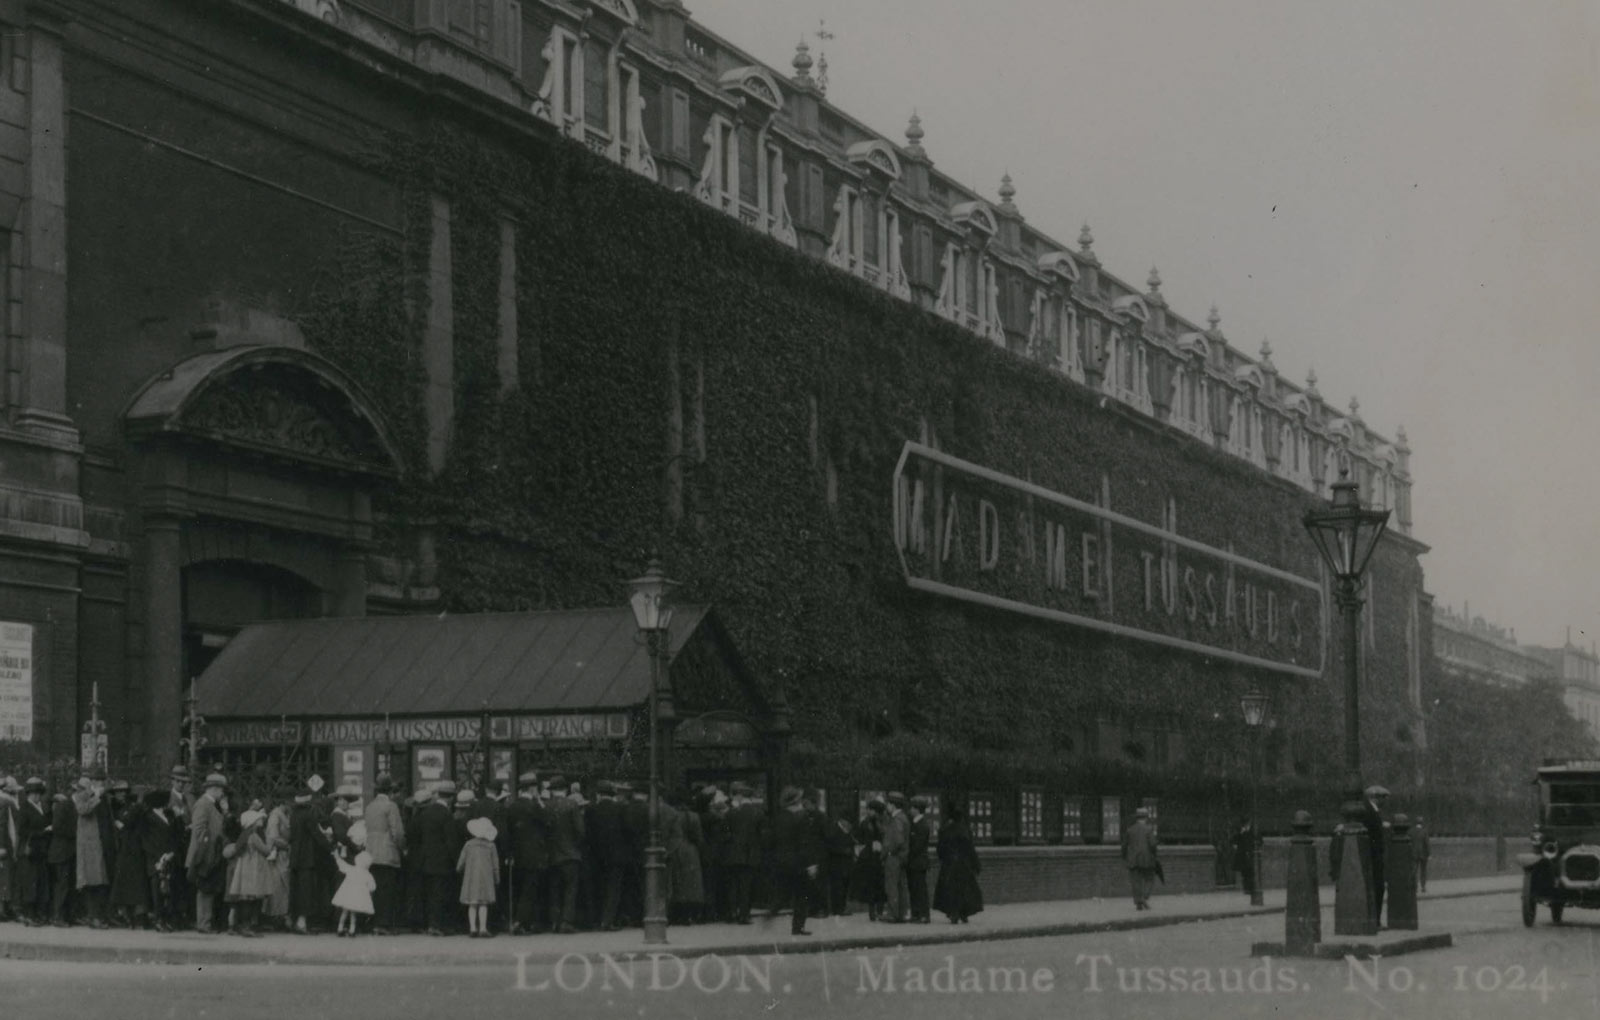 A historical black and white photograph of the exterior of Madame Tussauds London building. The building has a neoclassical facade with columns and ornate decorations, and a sign with the Madame Tussauds logo is visible above the entrance. 